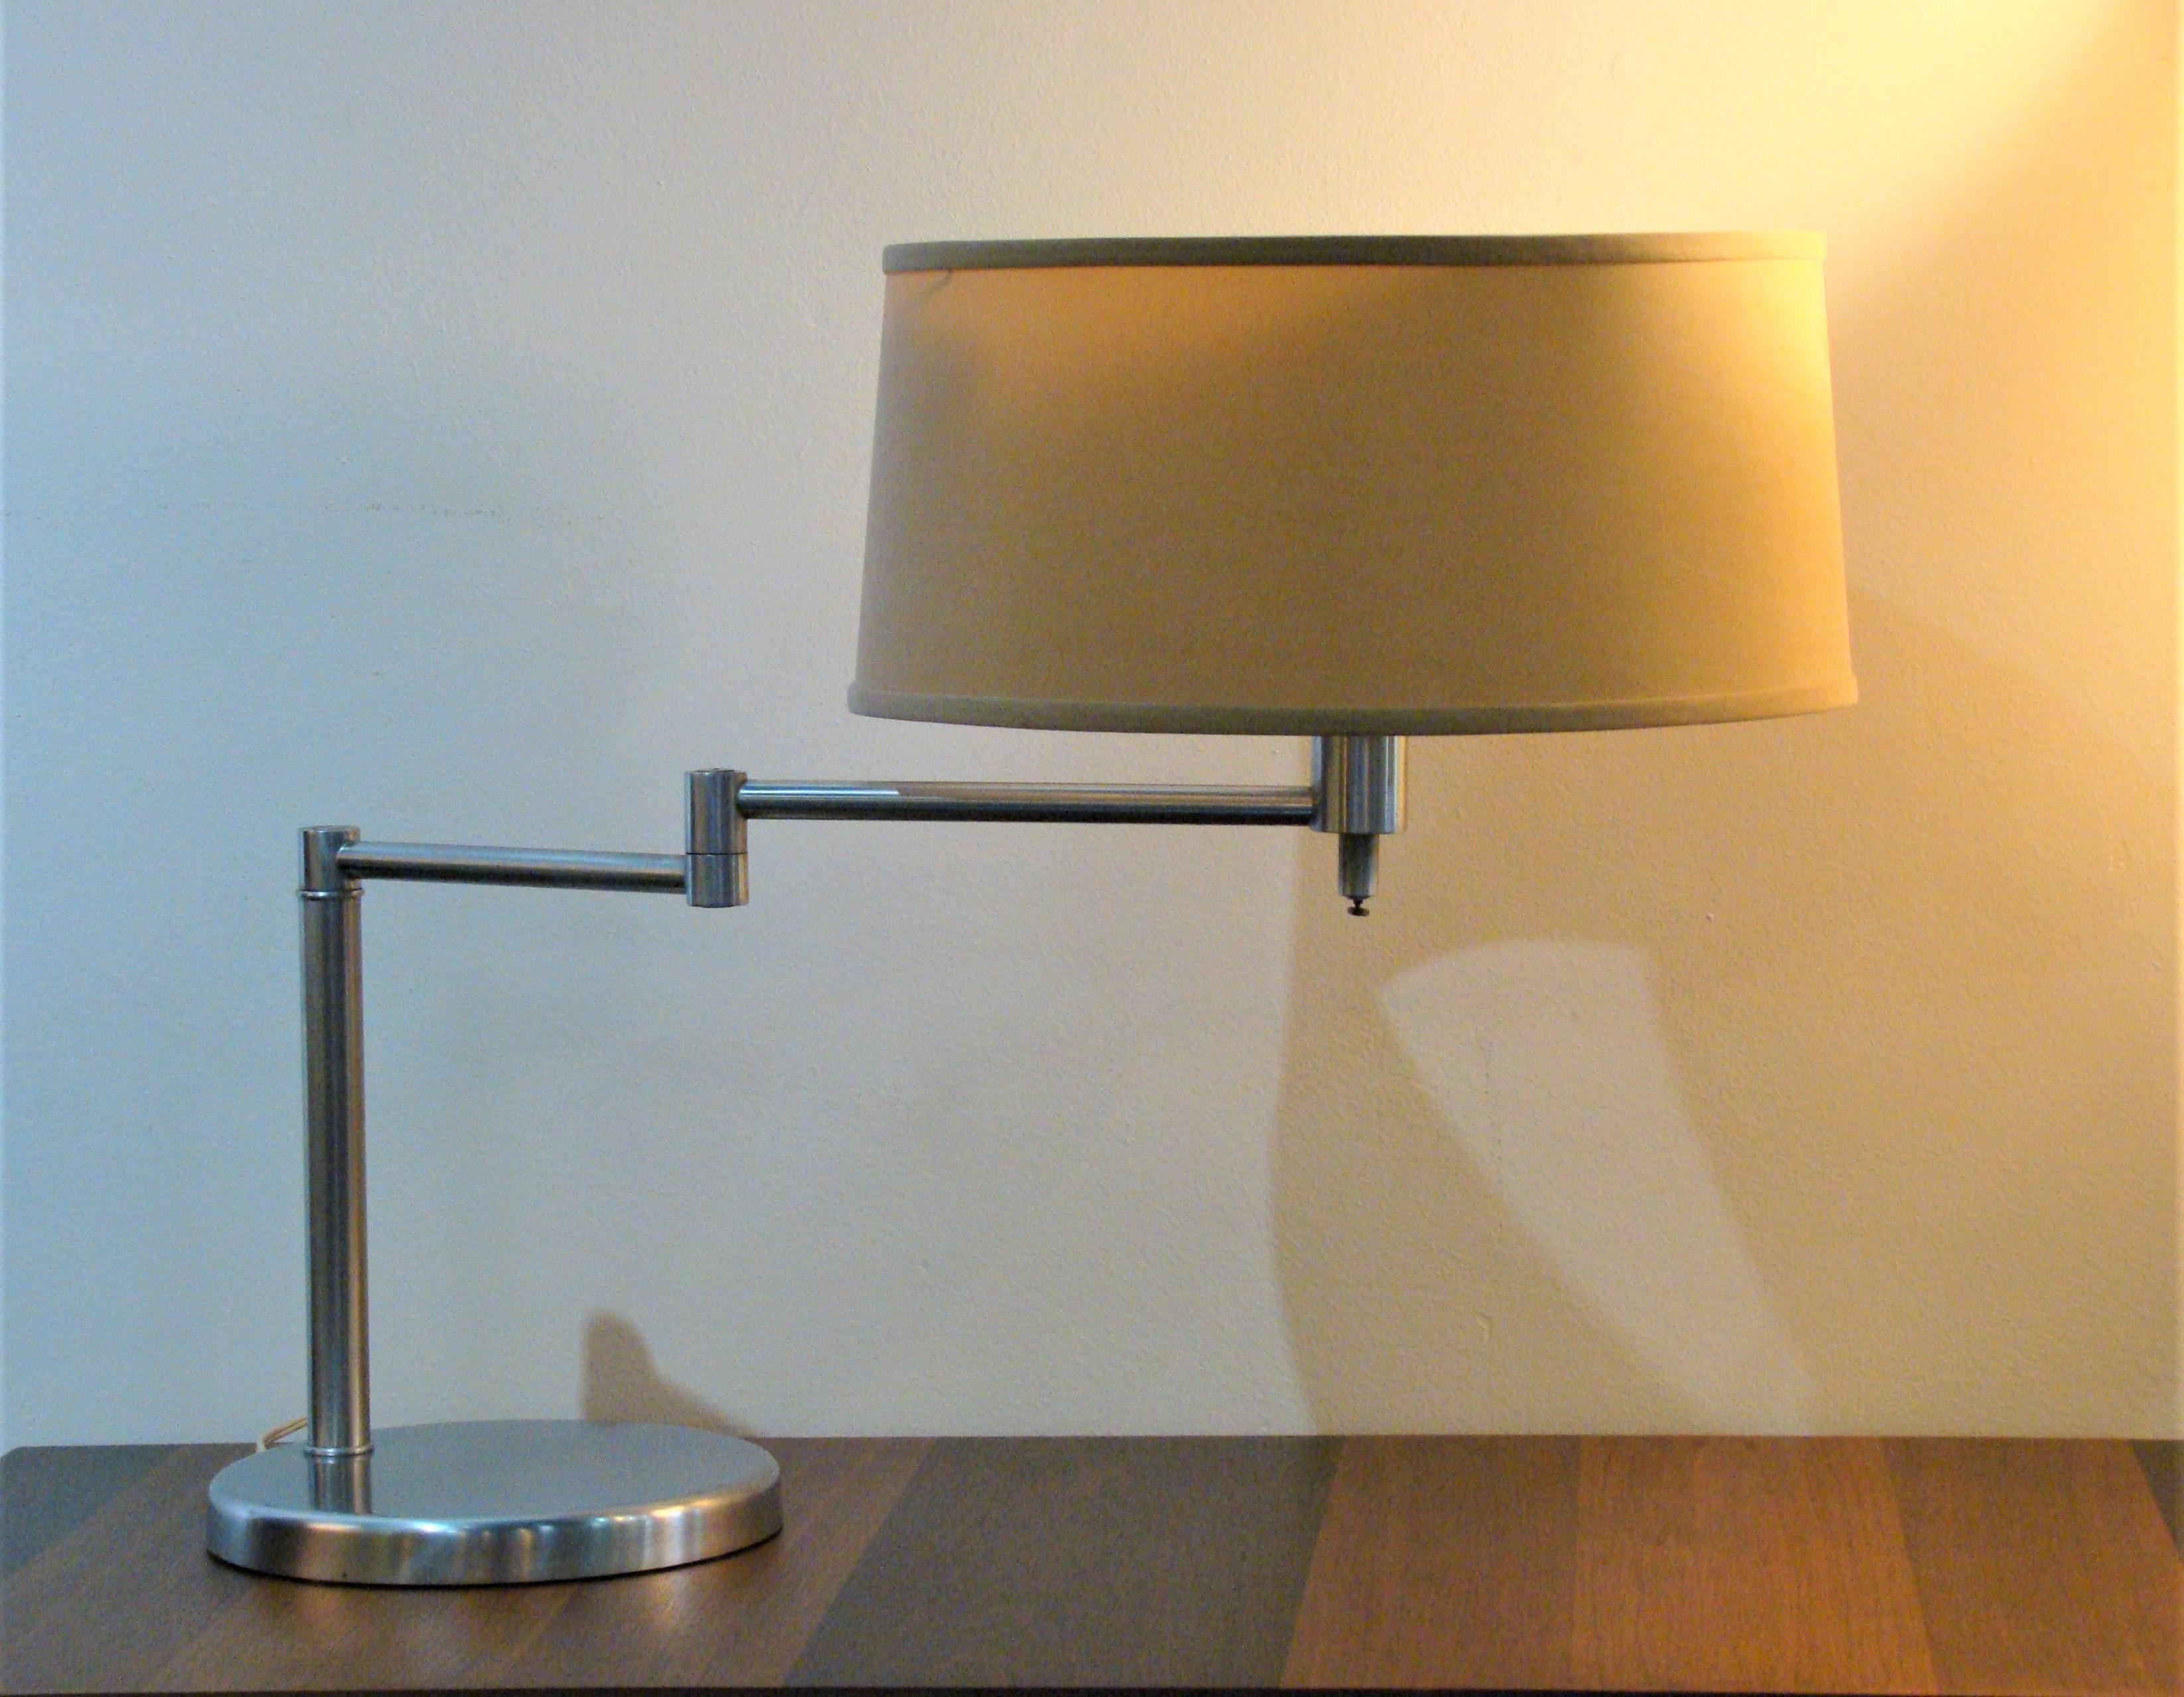 Vintage (c.1970's) swing-arm lamp manufactured by the Laurel Lamp Company, the design is after and attributed to Walter Von Nessen. Constructed of brushed nickel the lamp is solid, functions well and is in good overall condition with some surface